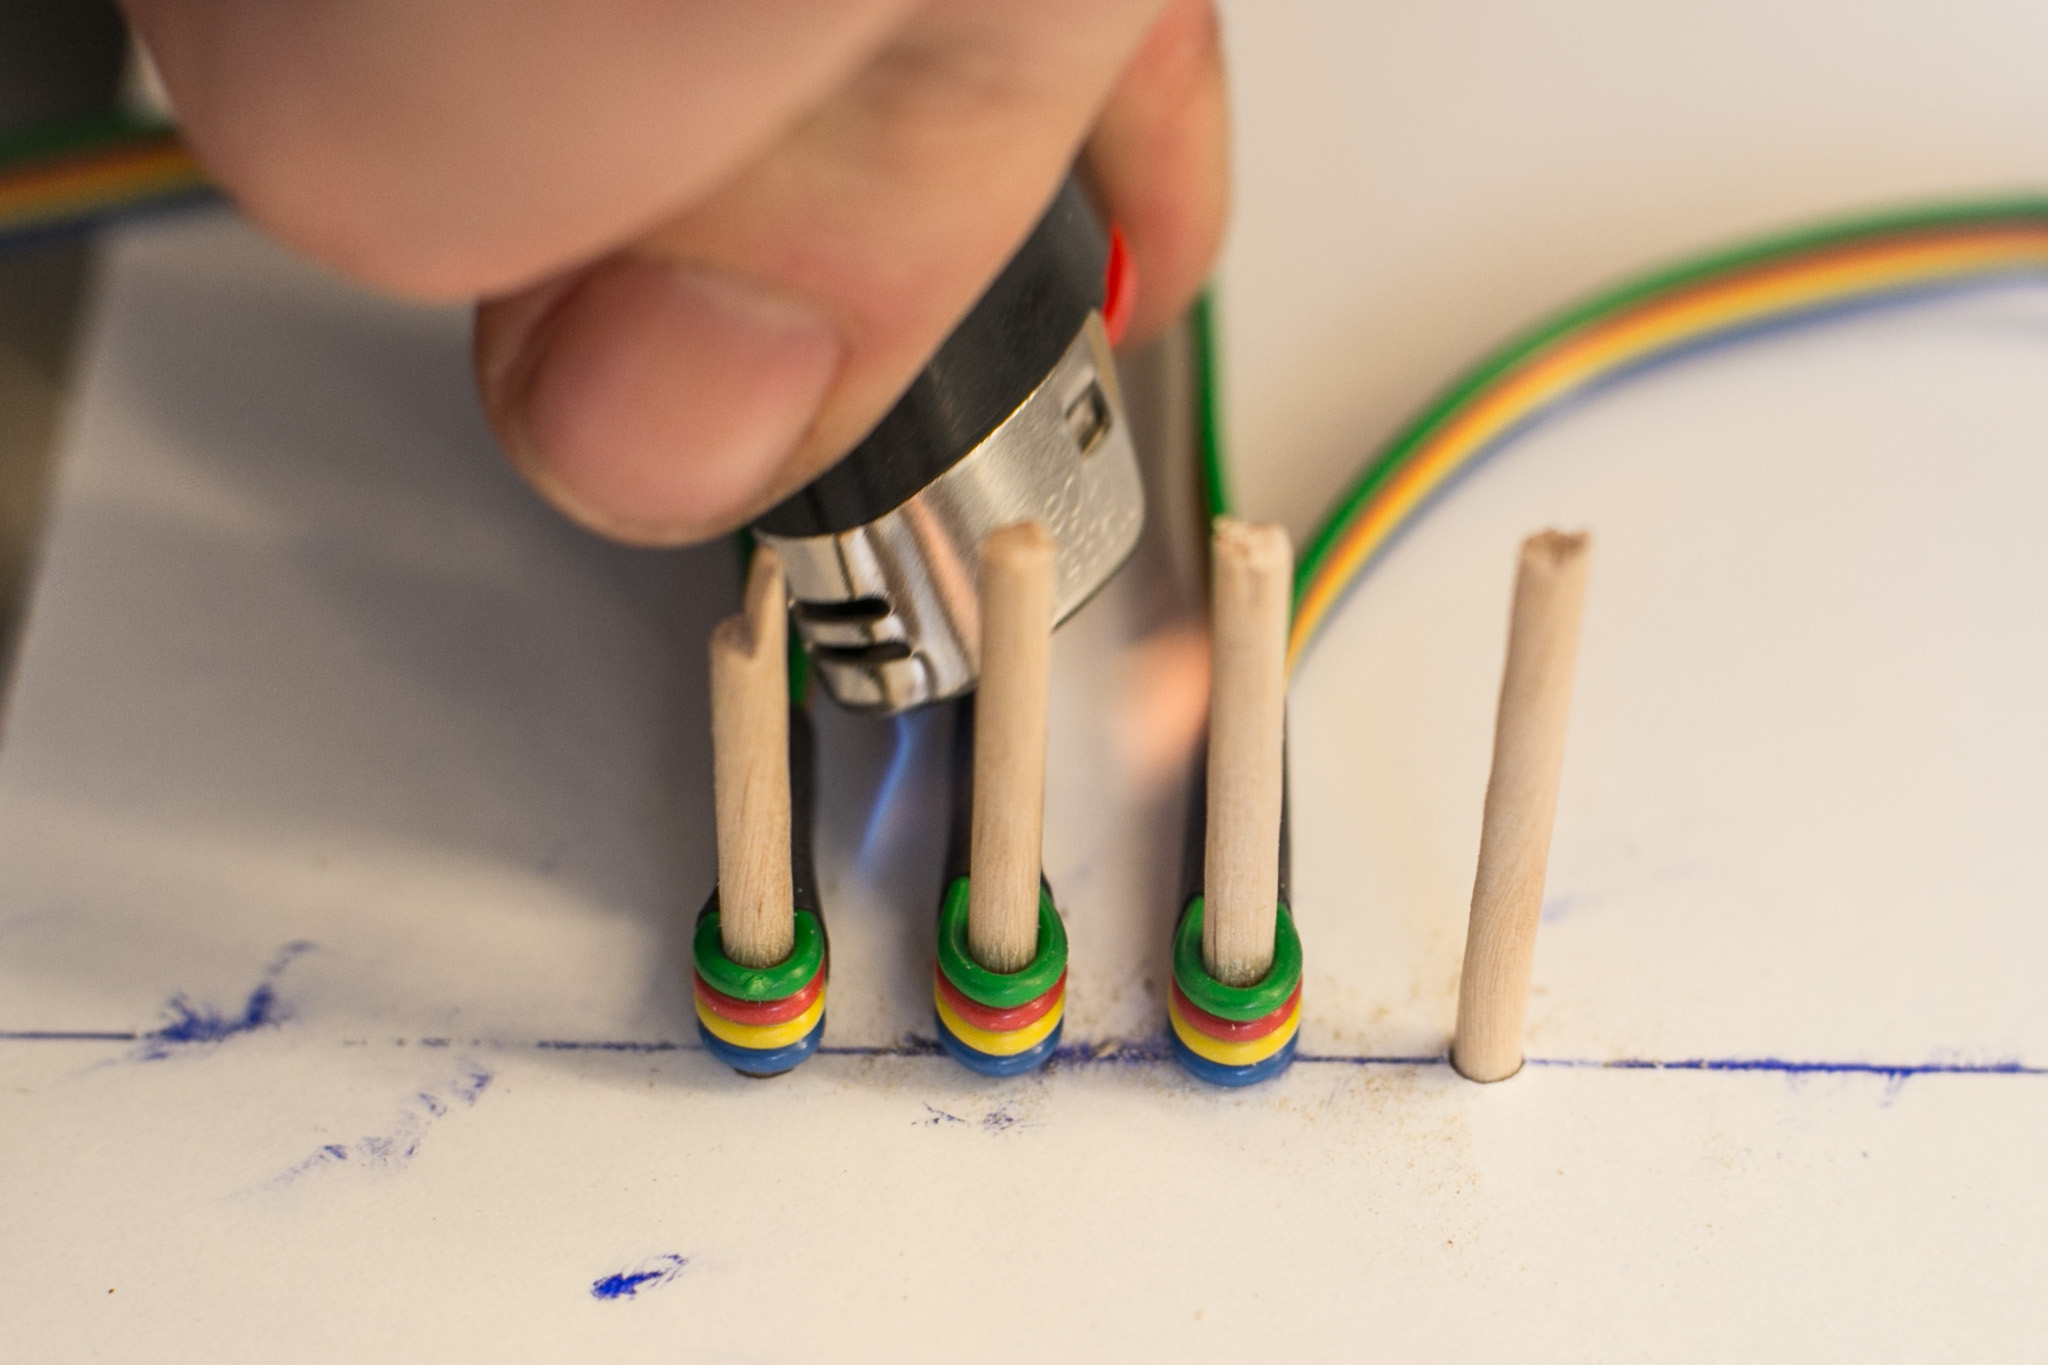 Shrink shrinking tubing with lighter while cable is attached to template